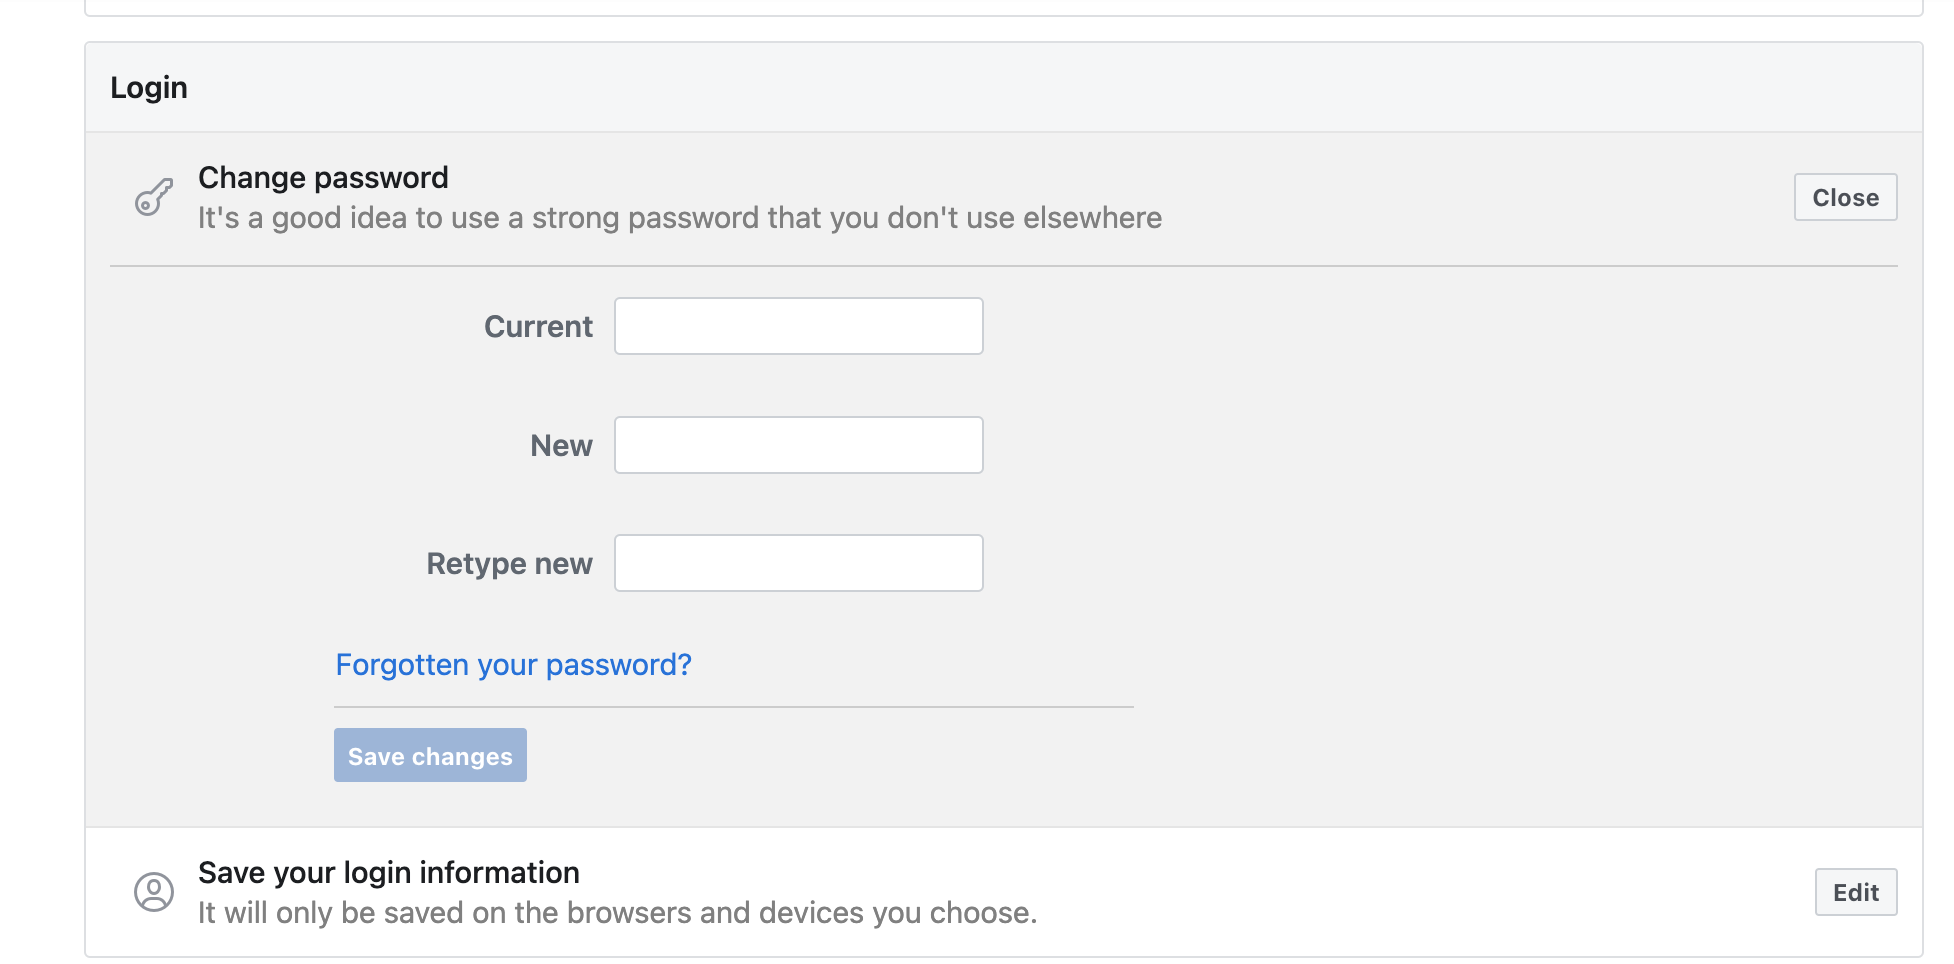 Enter your current password, then type your new password and retype it